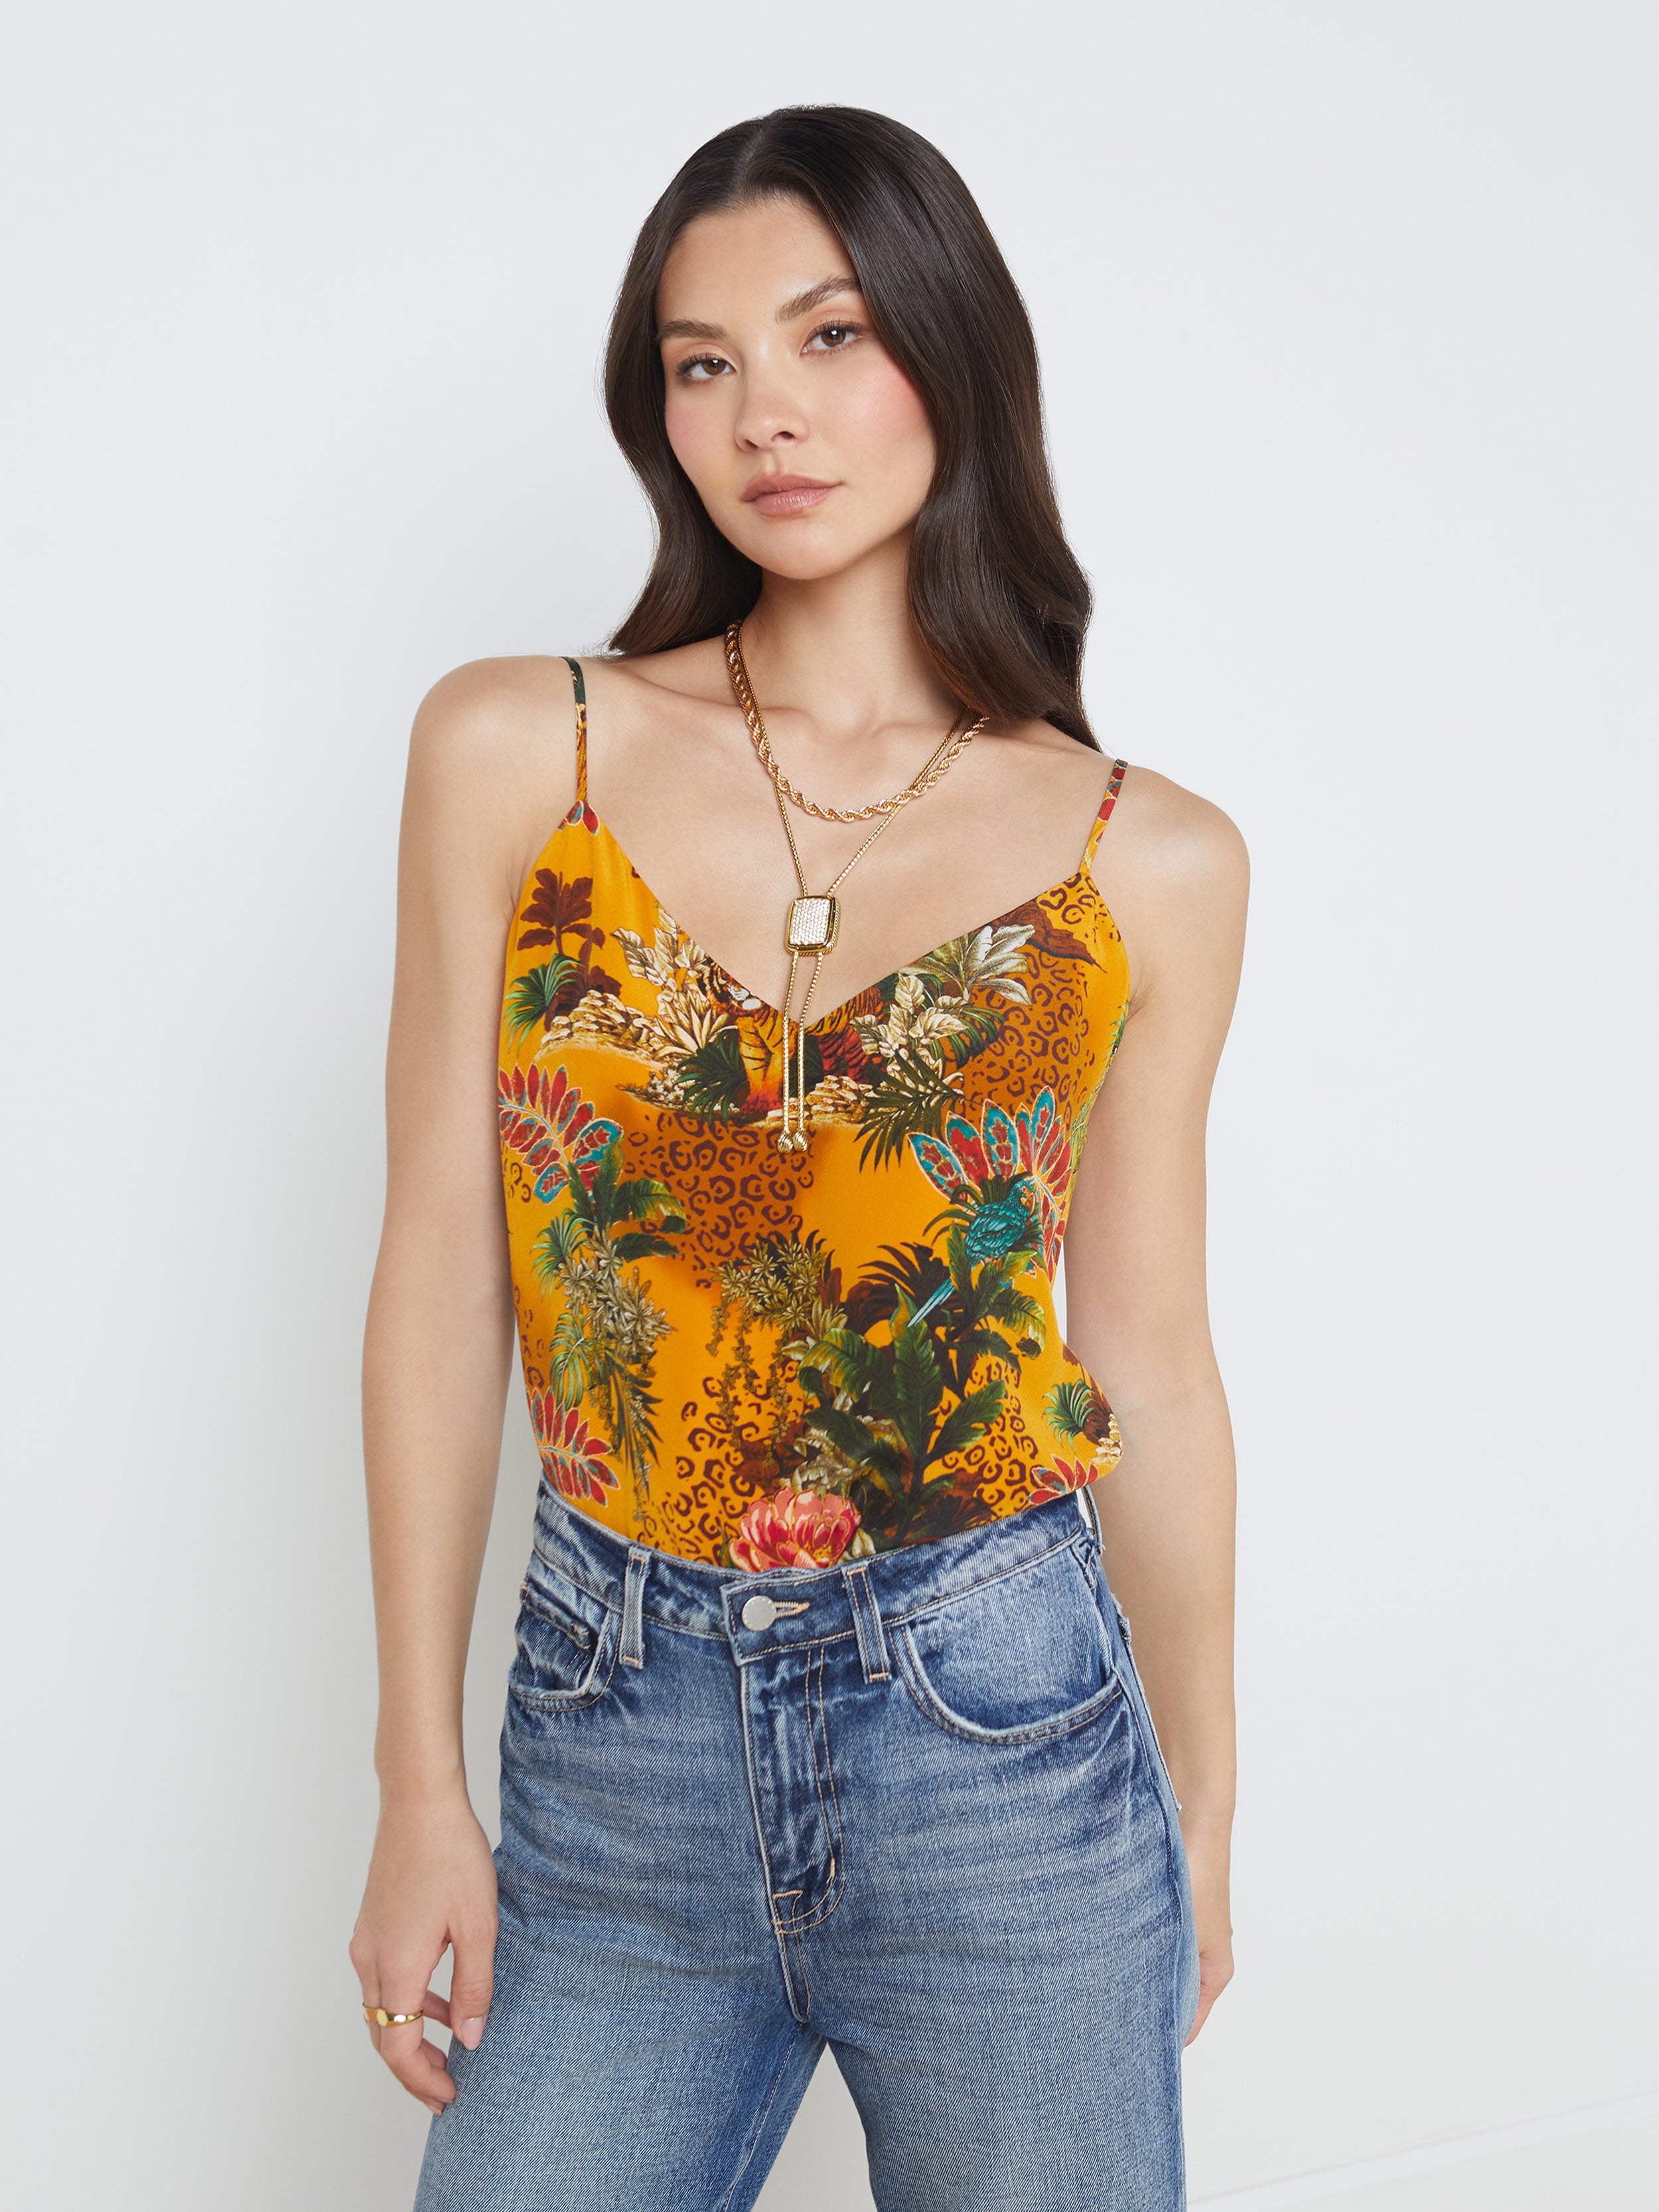 Aeropostale Womens Floral Cami Tank Top, Yellow, Large 